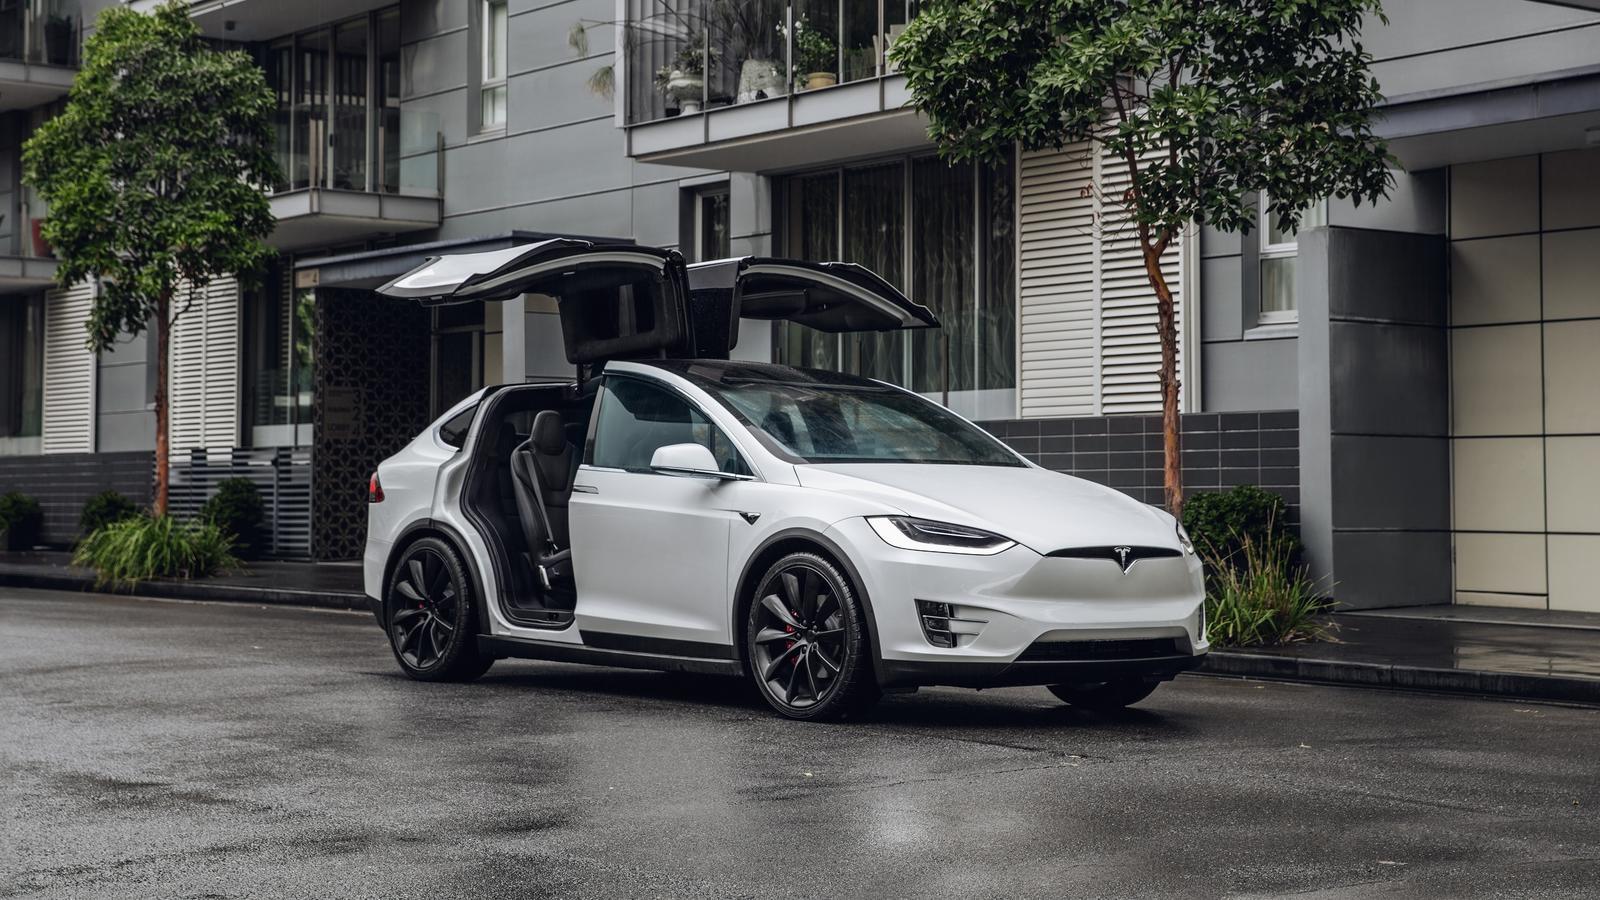 Tesla Model X Picture, Photo, Wallpaper And Videos